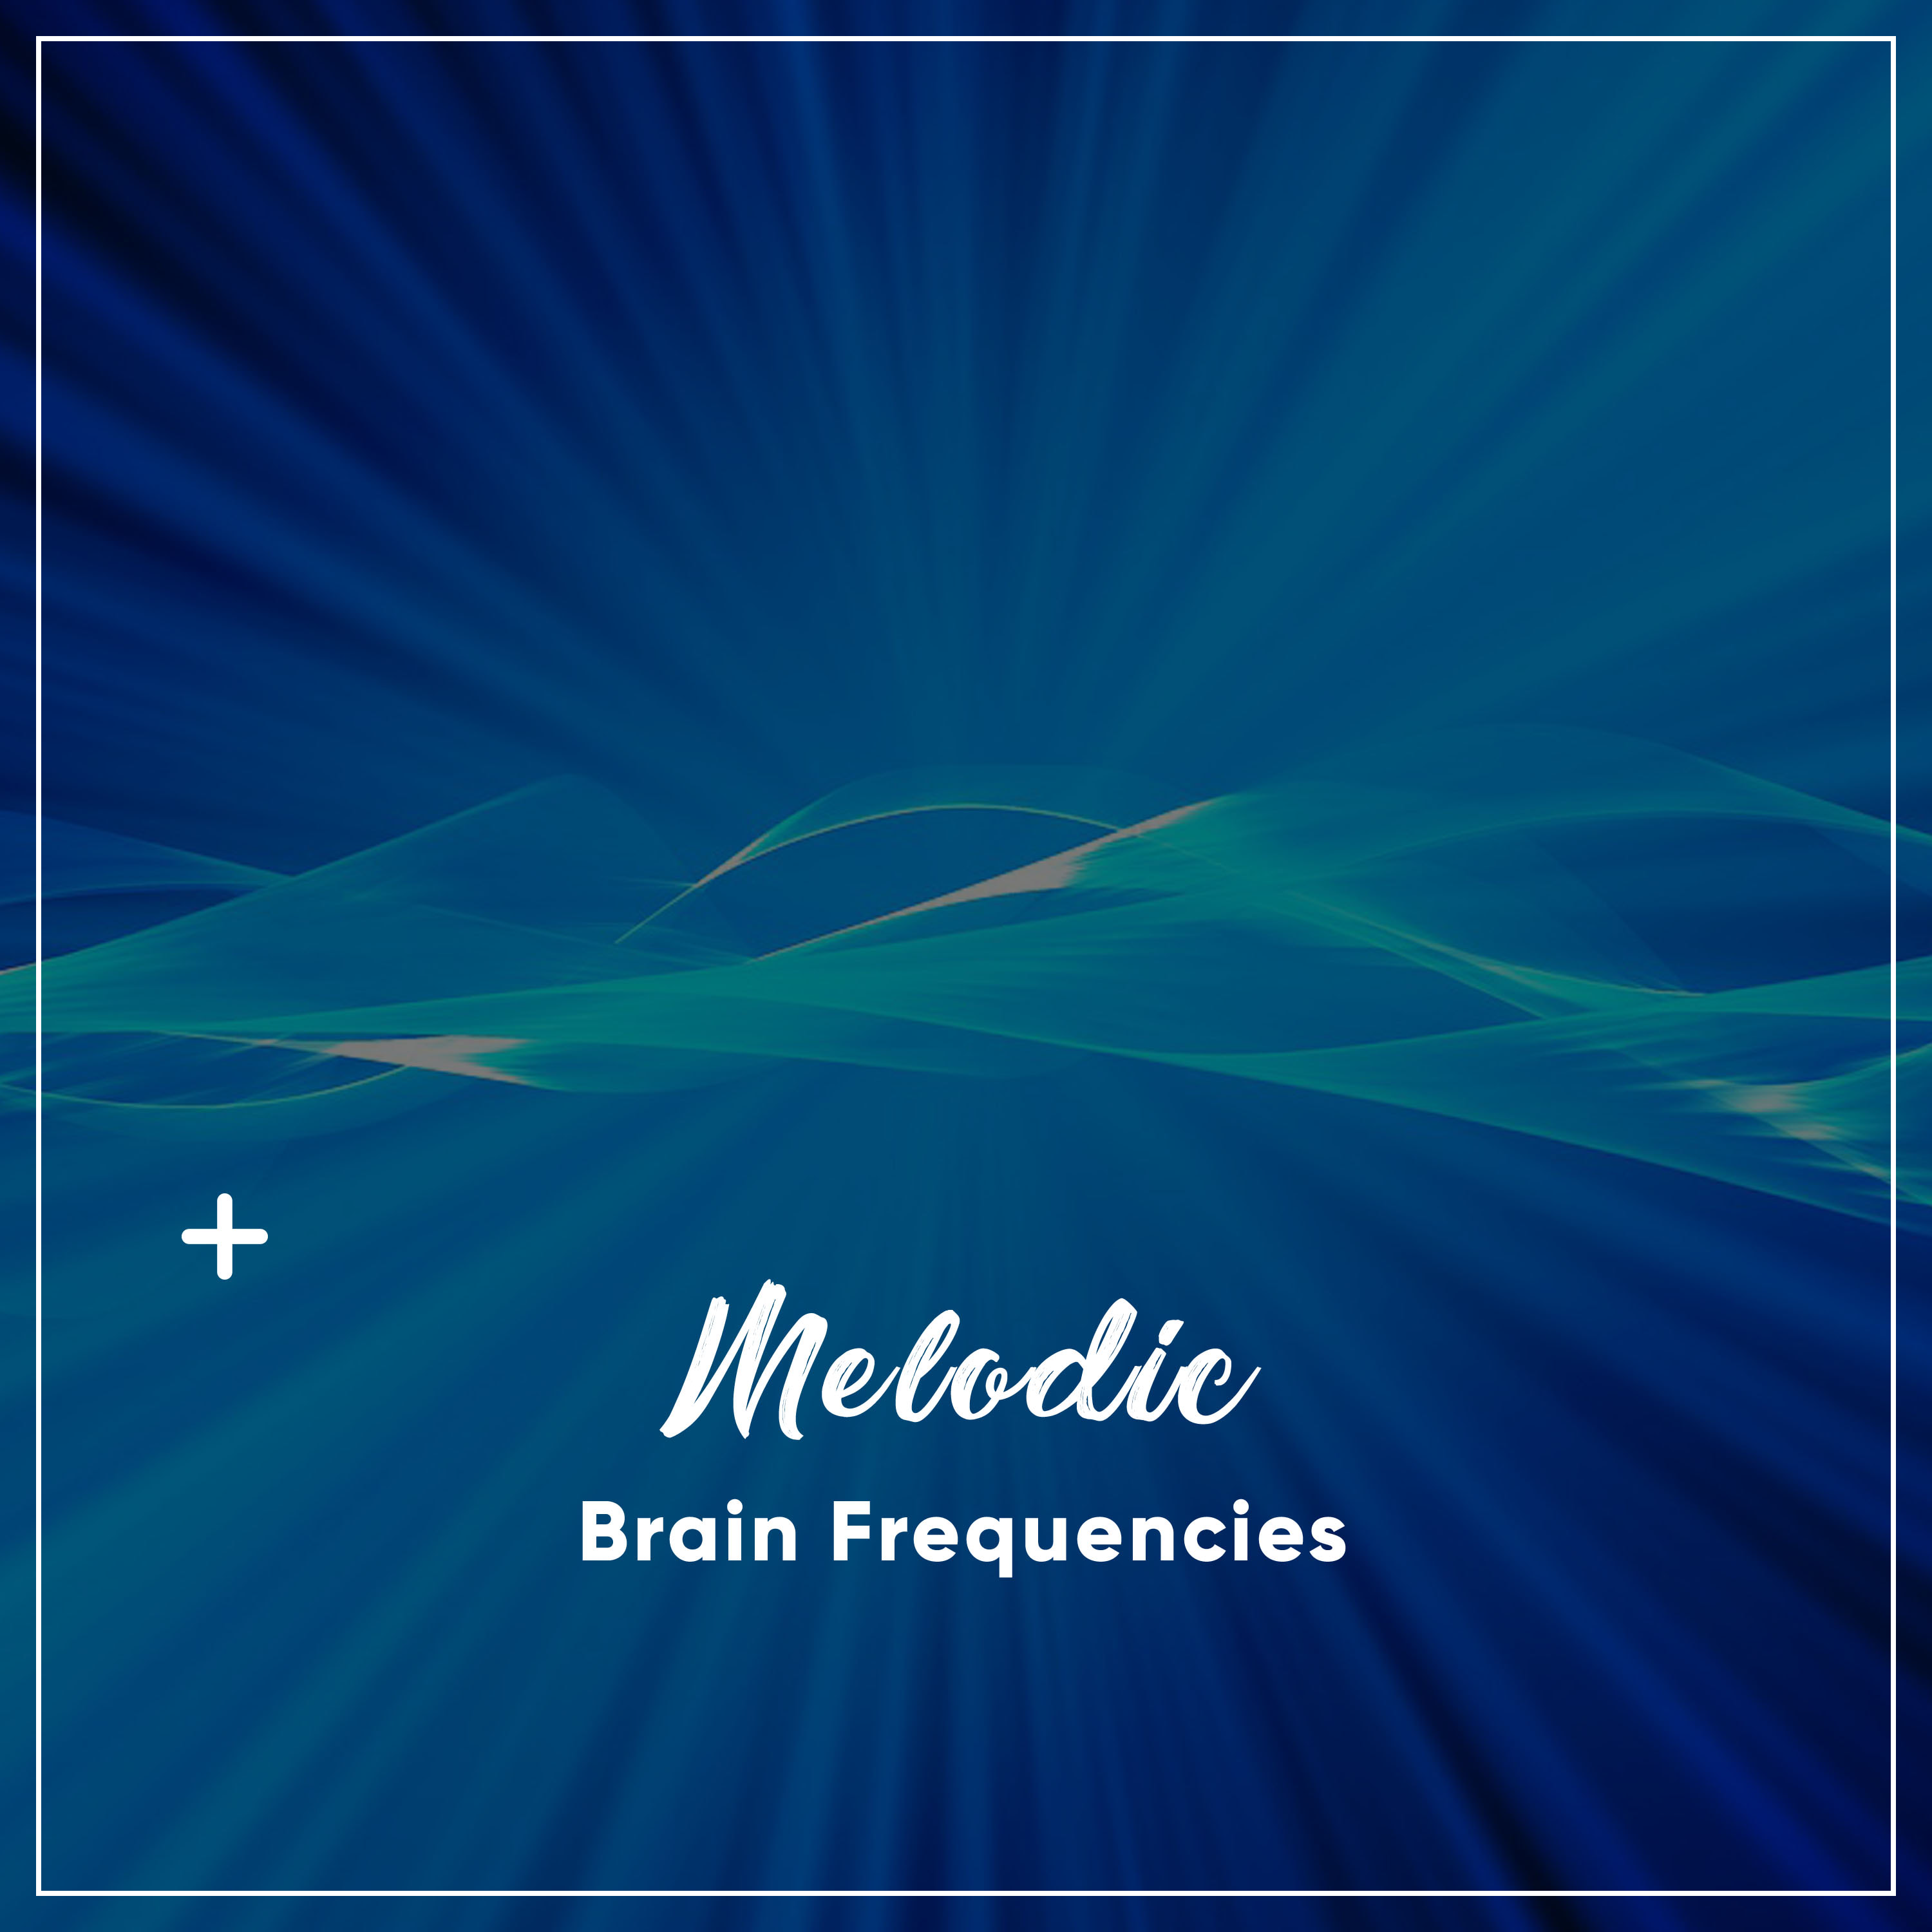 #18 Melodic Brain Frequencies